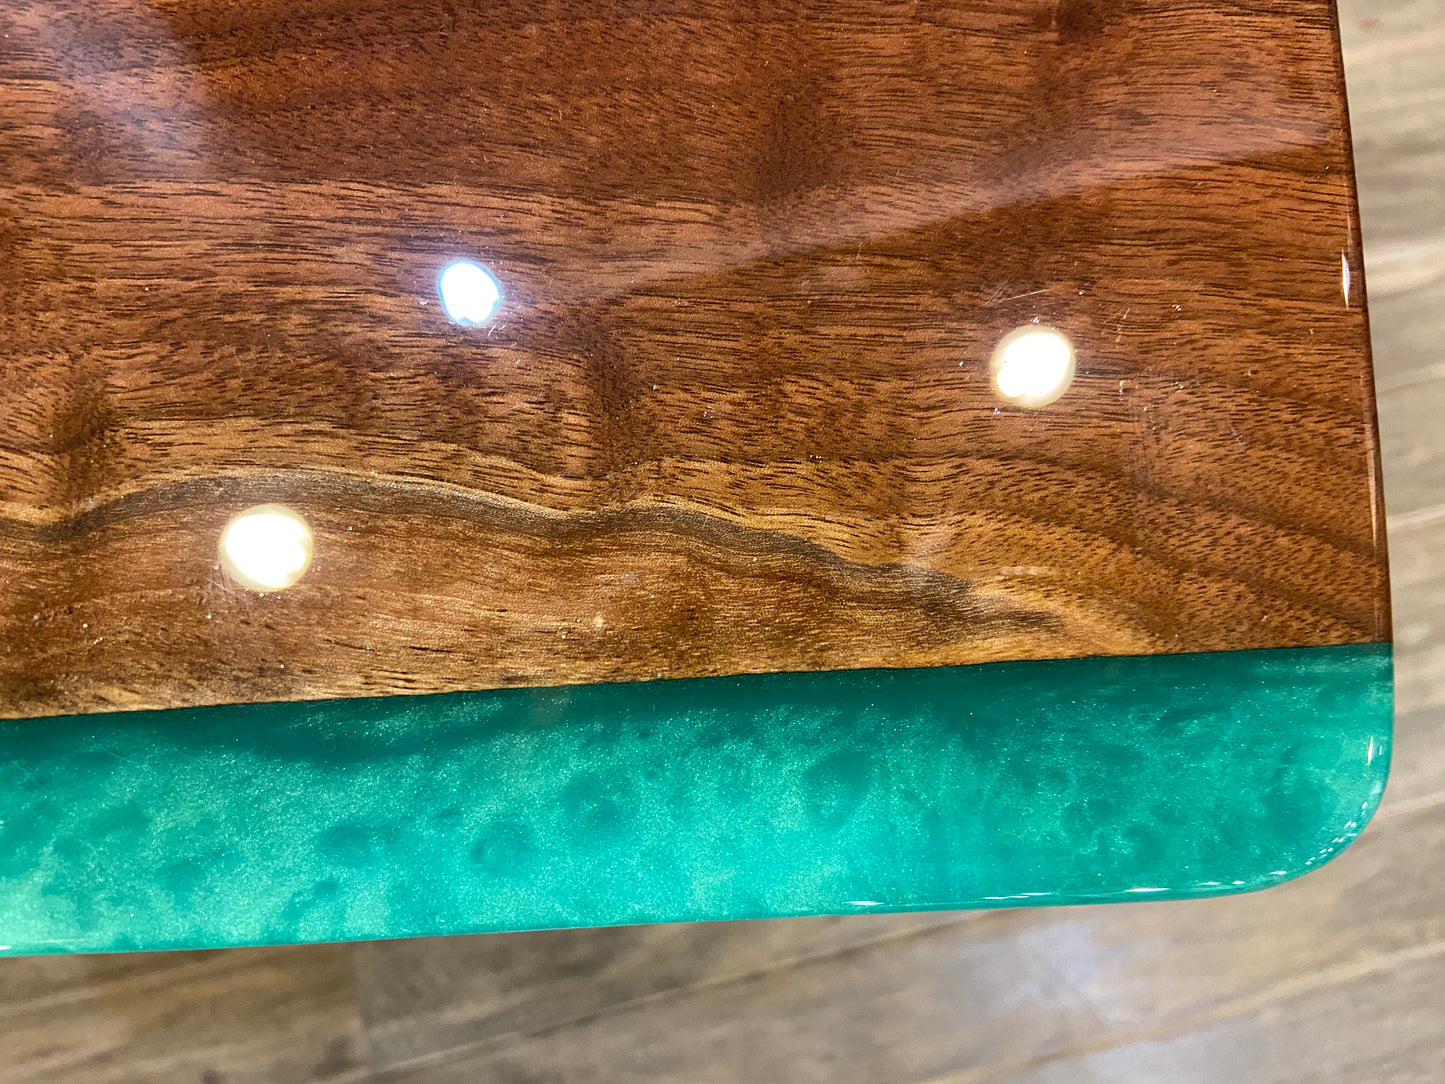 Table/Bench With a Green Edge